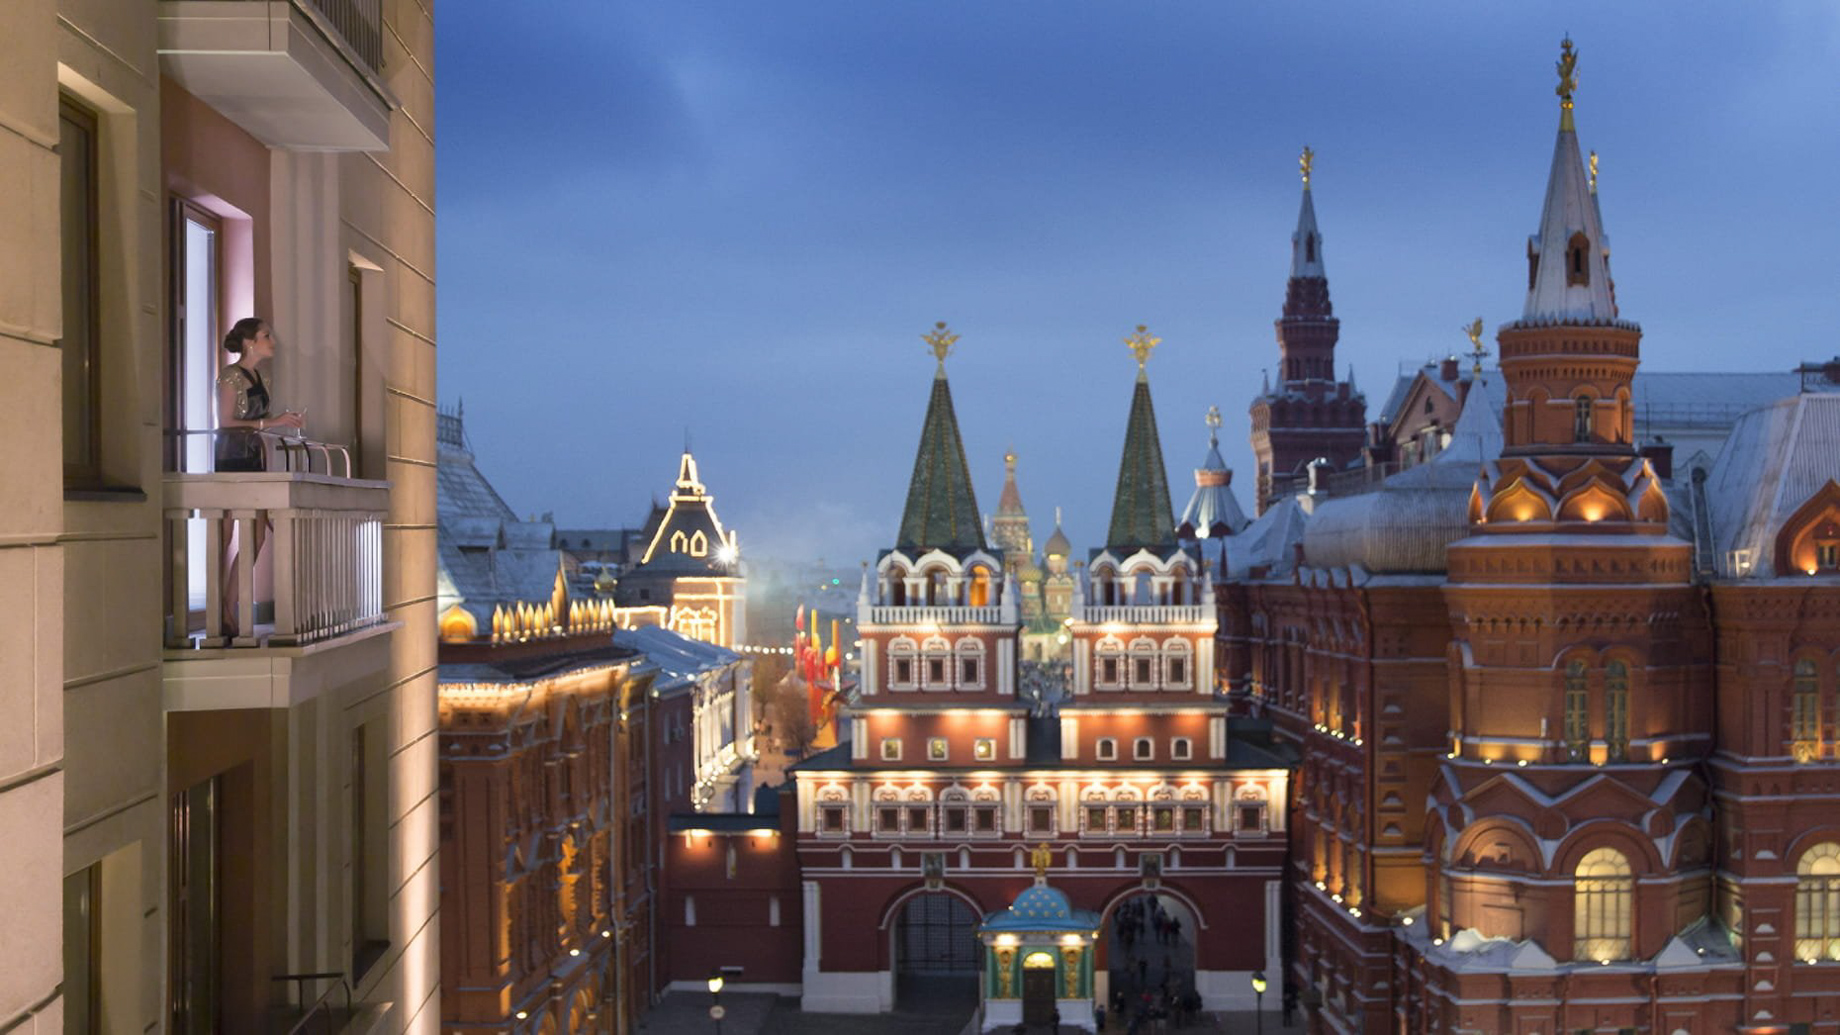 Four Seasons Hotel Moscow - Moscow, Russia - Presidential Suite Balcony